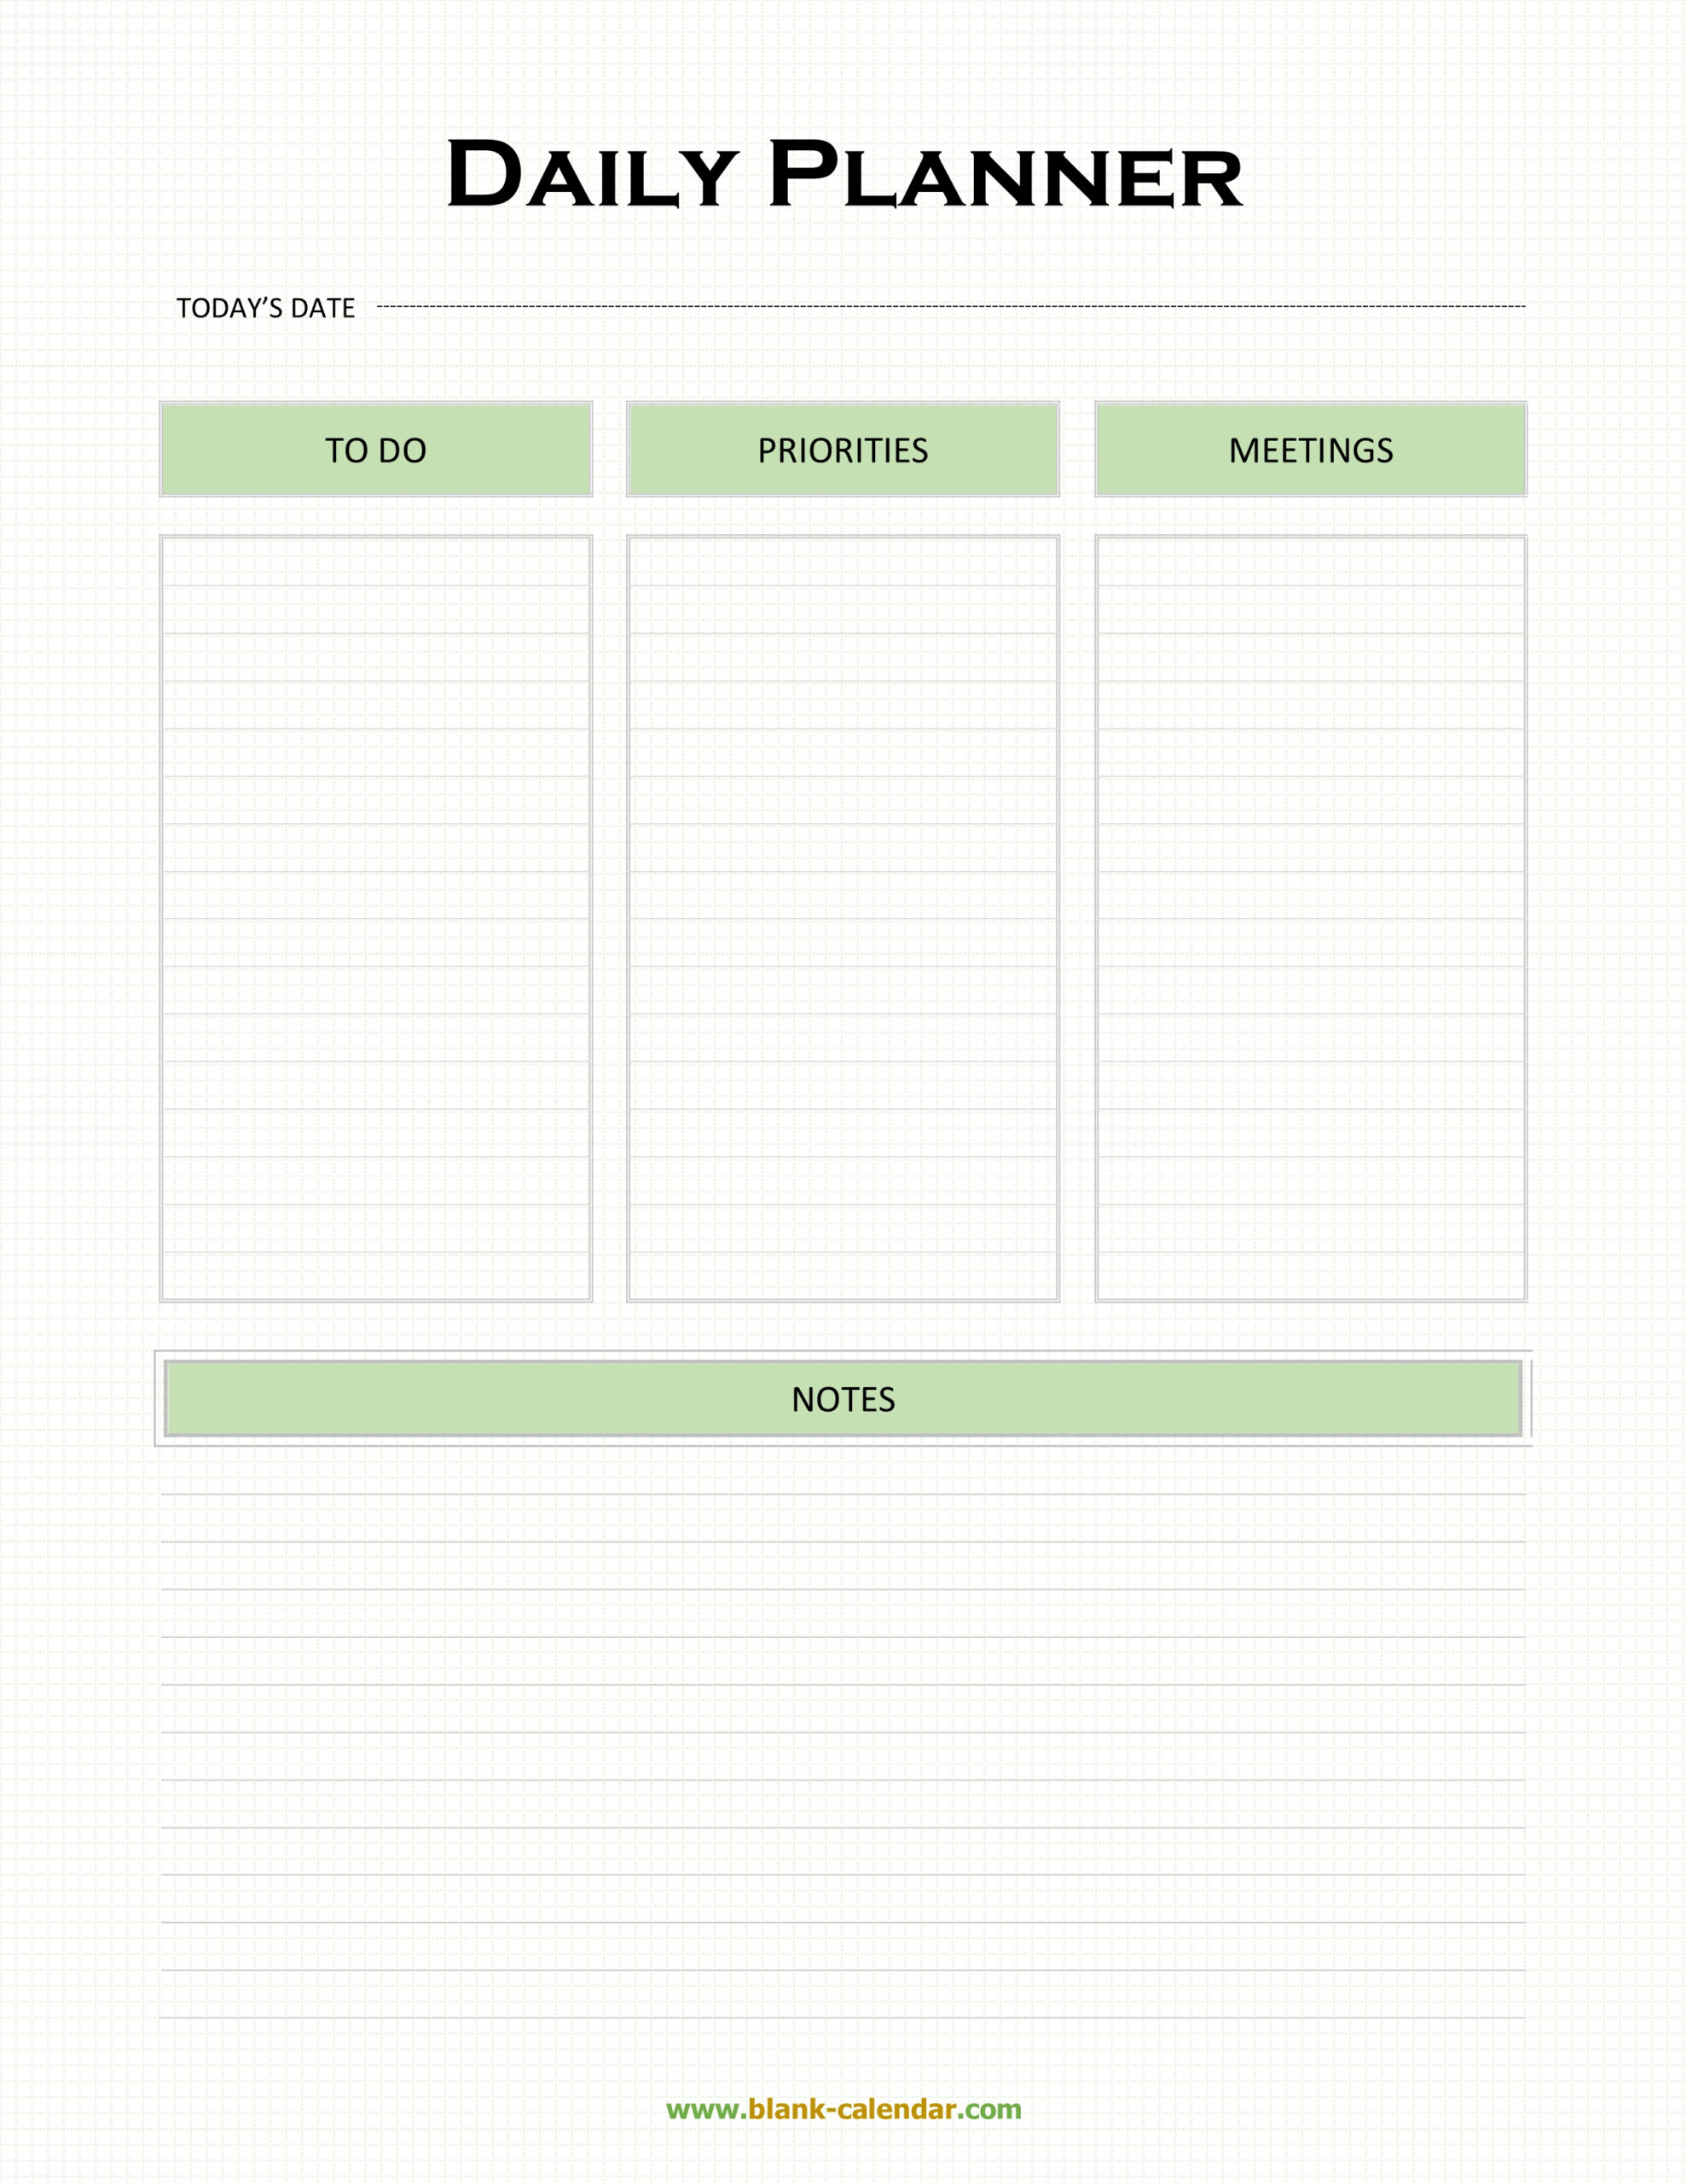 Daily Planner Templates (WORD, EXCEL, PDF) For Printable Blank Daily Schedule Template